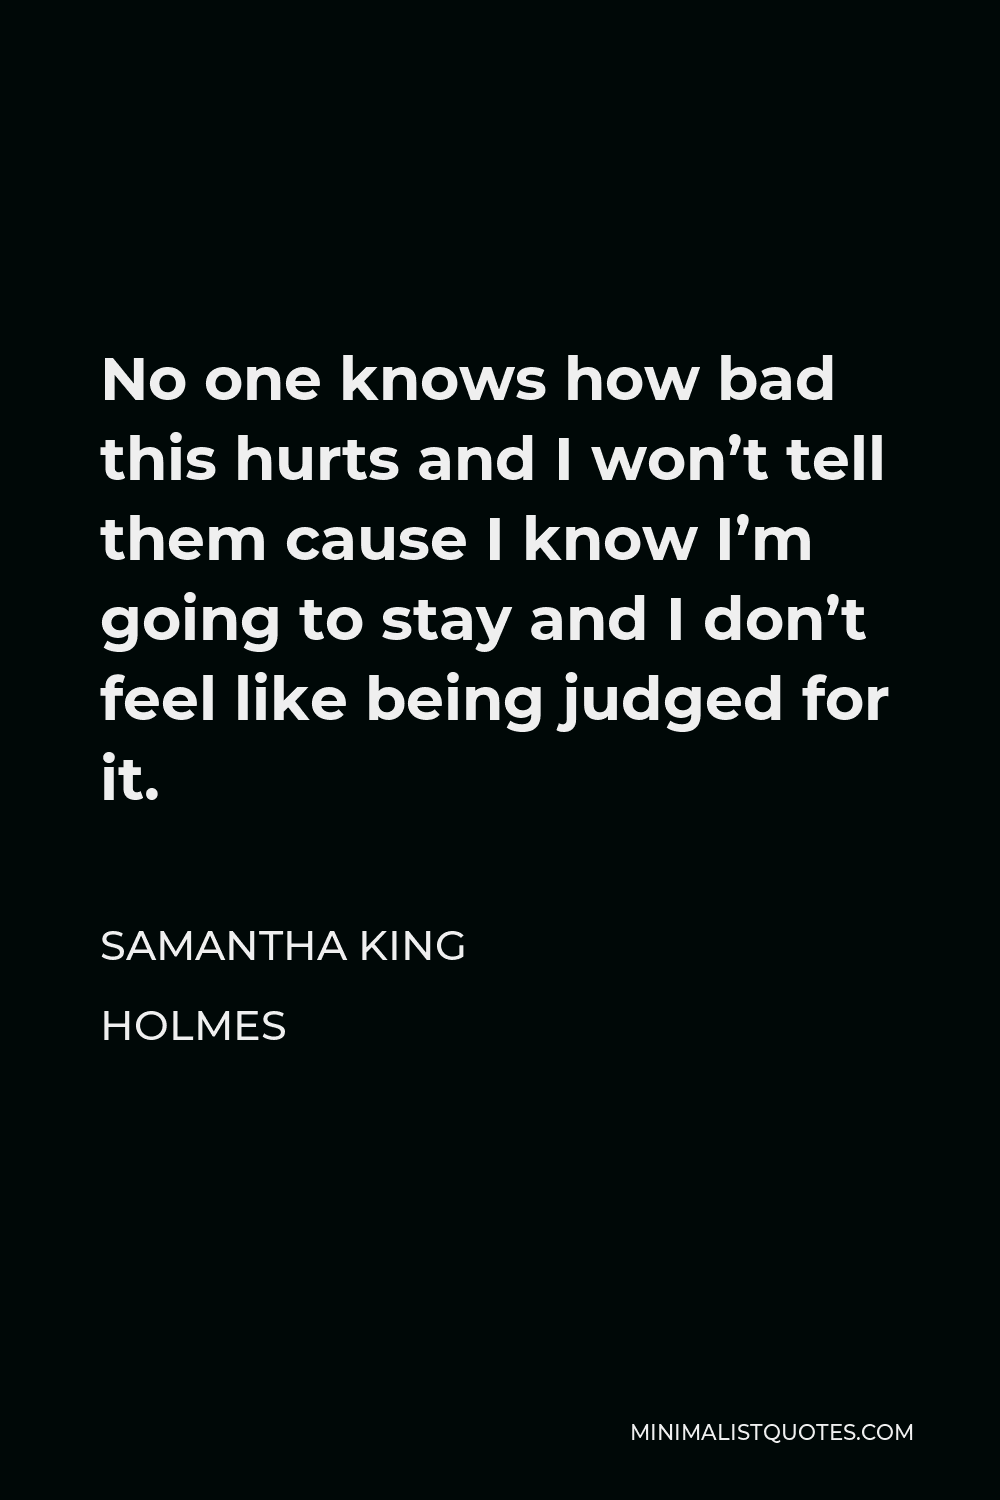 Samantha King Holmes Quote - No one knows how bad this hurts and I won’t tell them cause I know I’m going to stay and I don’t feel like being judged for it.